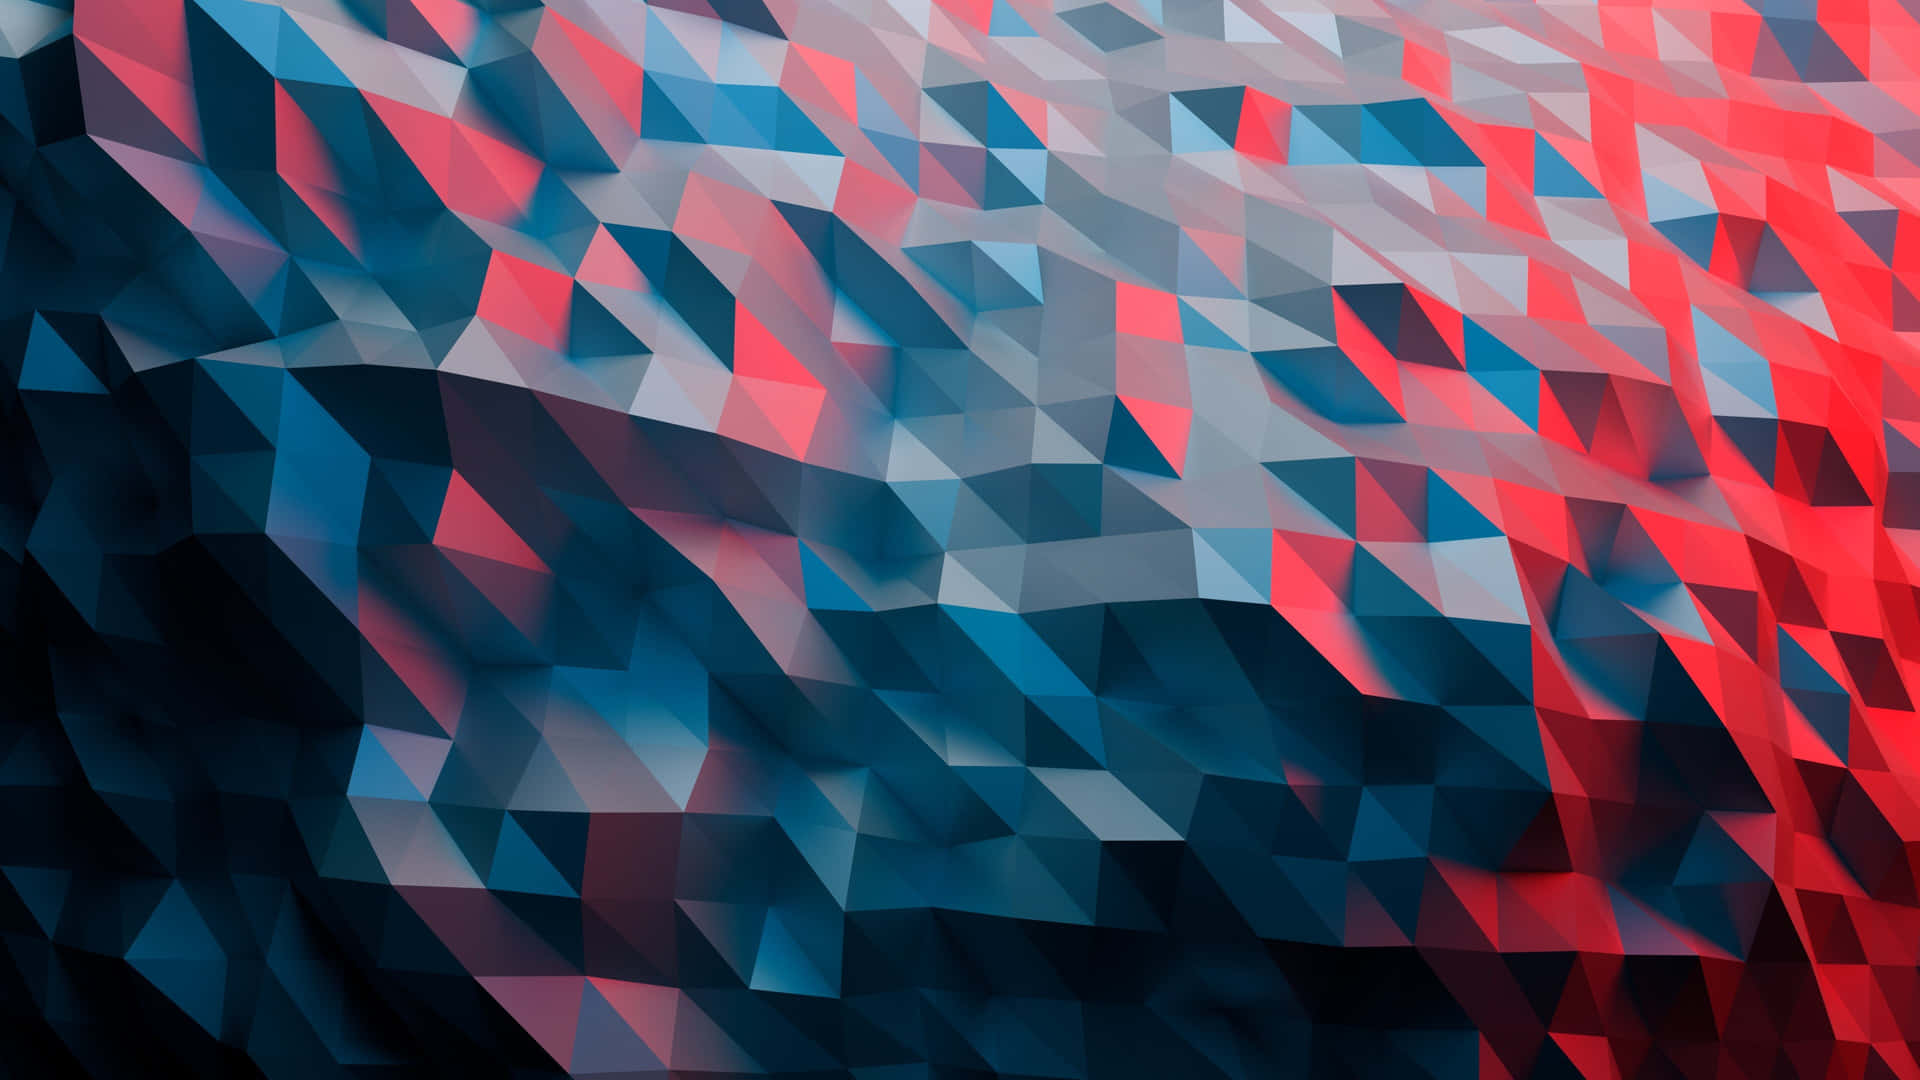 "A low-poly landscape featuring colorful geometric shapes and lines."